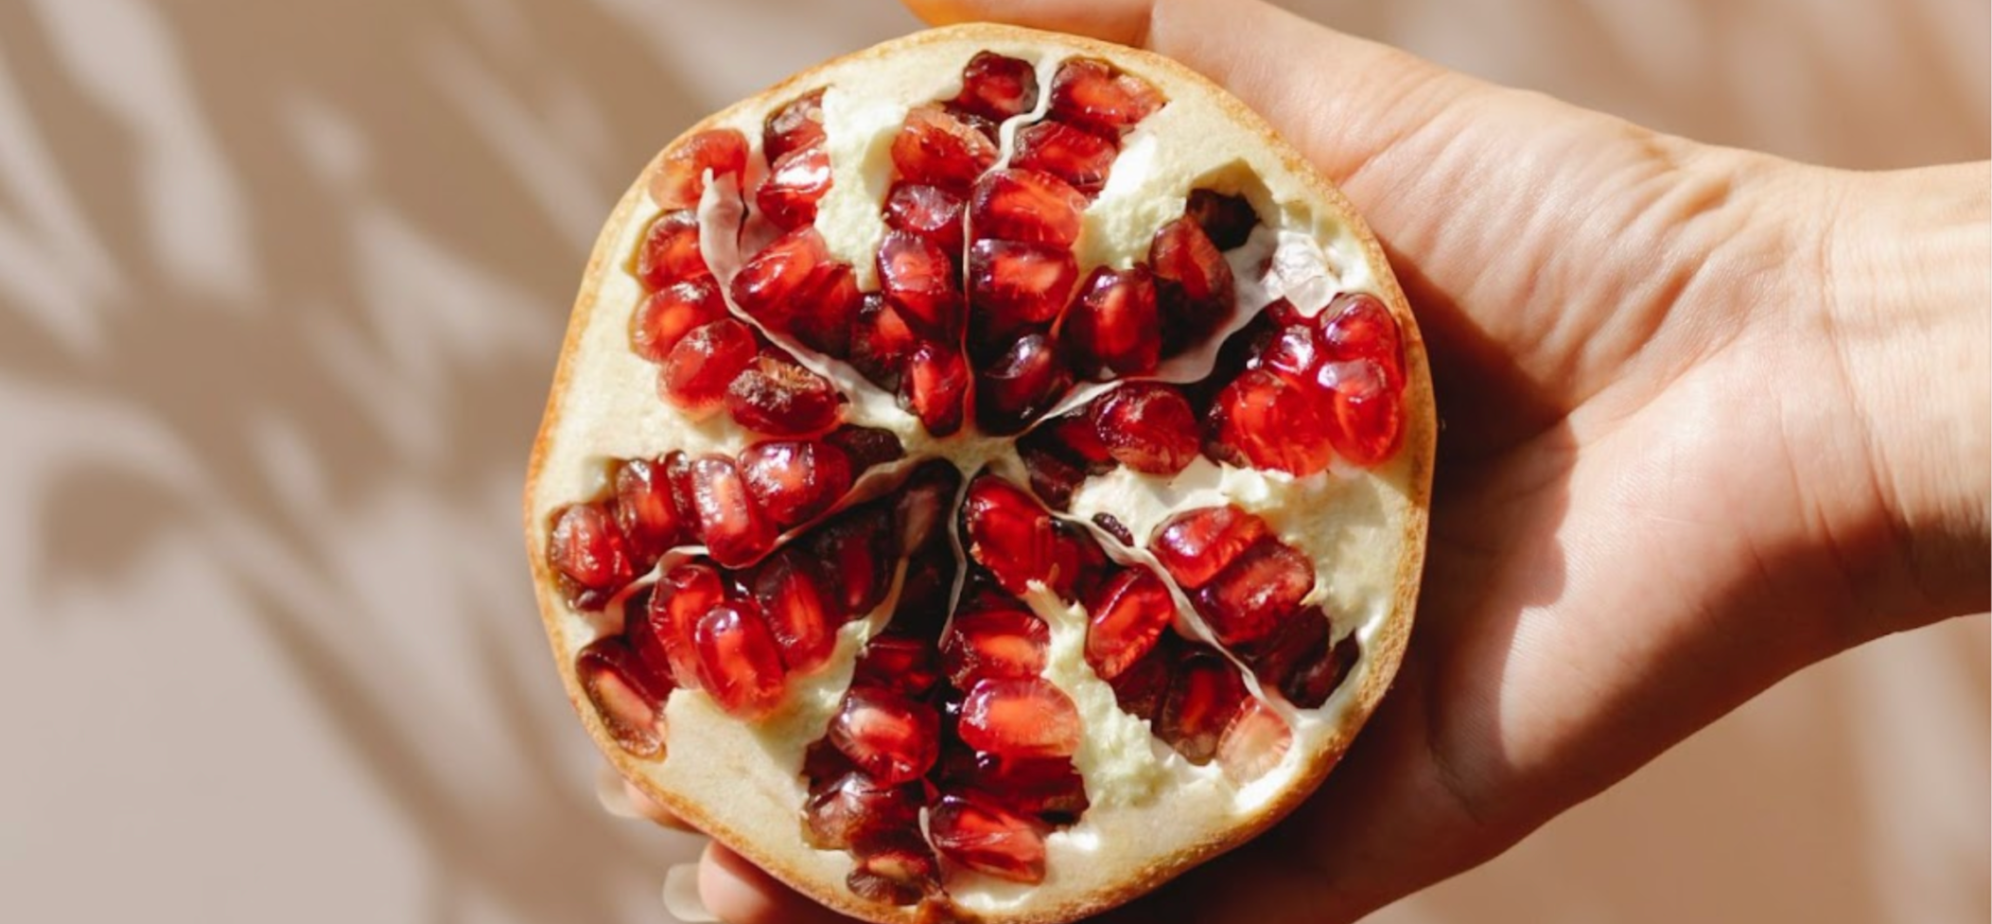 Close-up of woman’s hand holding half a pomegranate